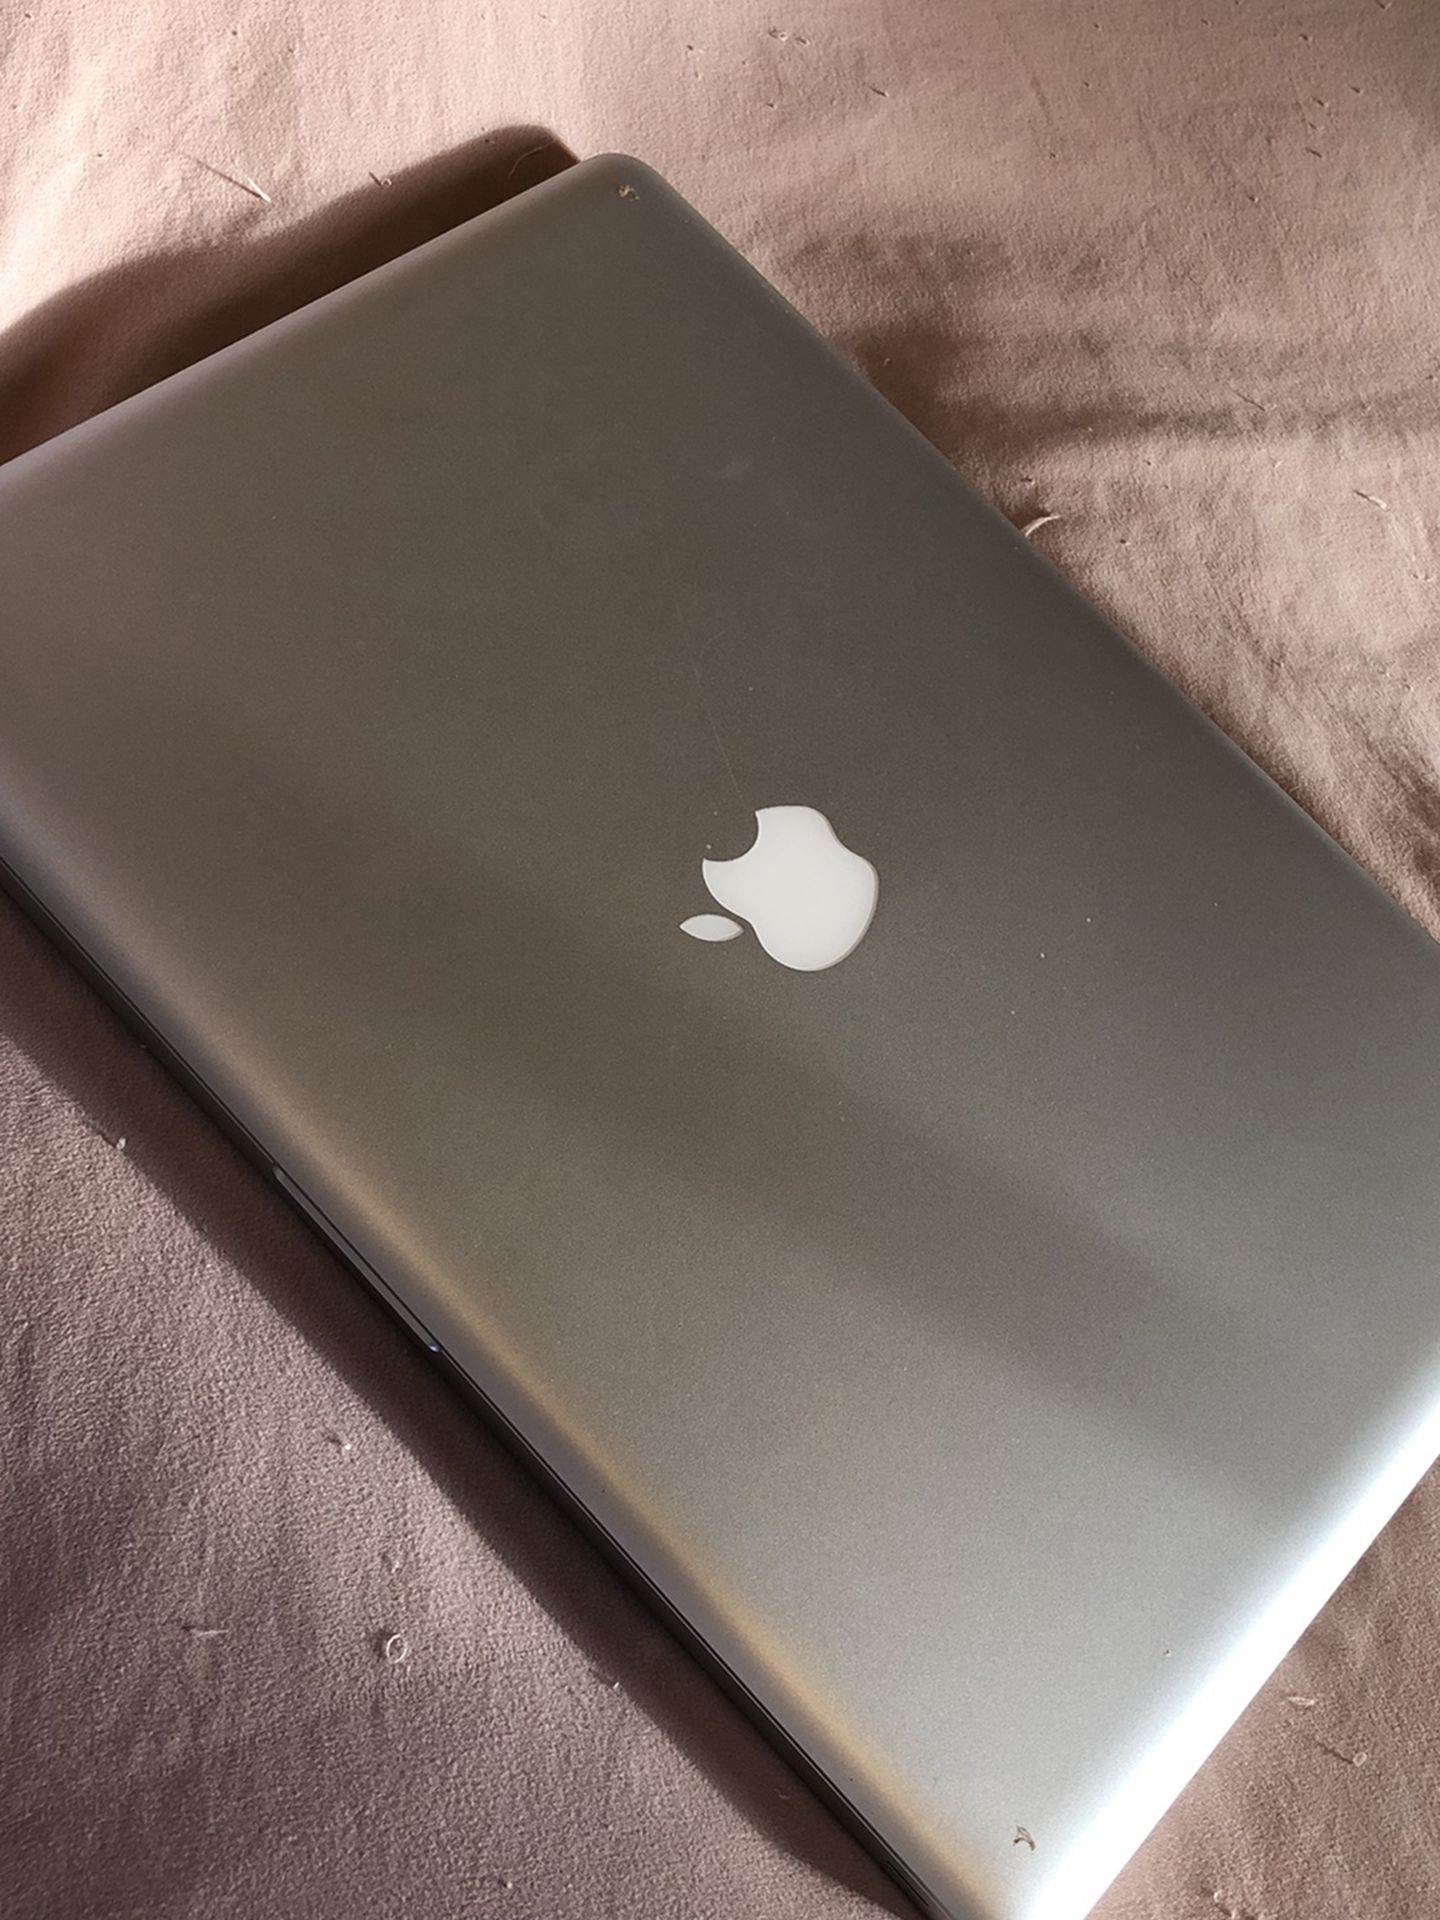 2012 Mac book Pro + Charger - Great Working Condition!